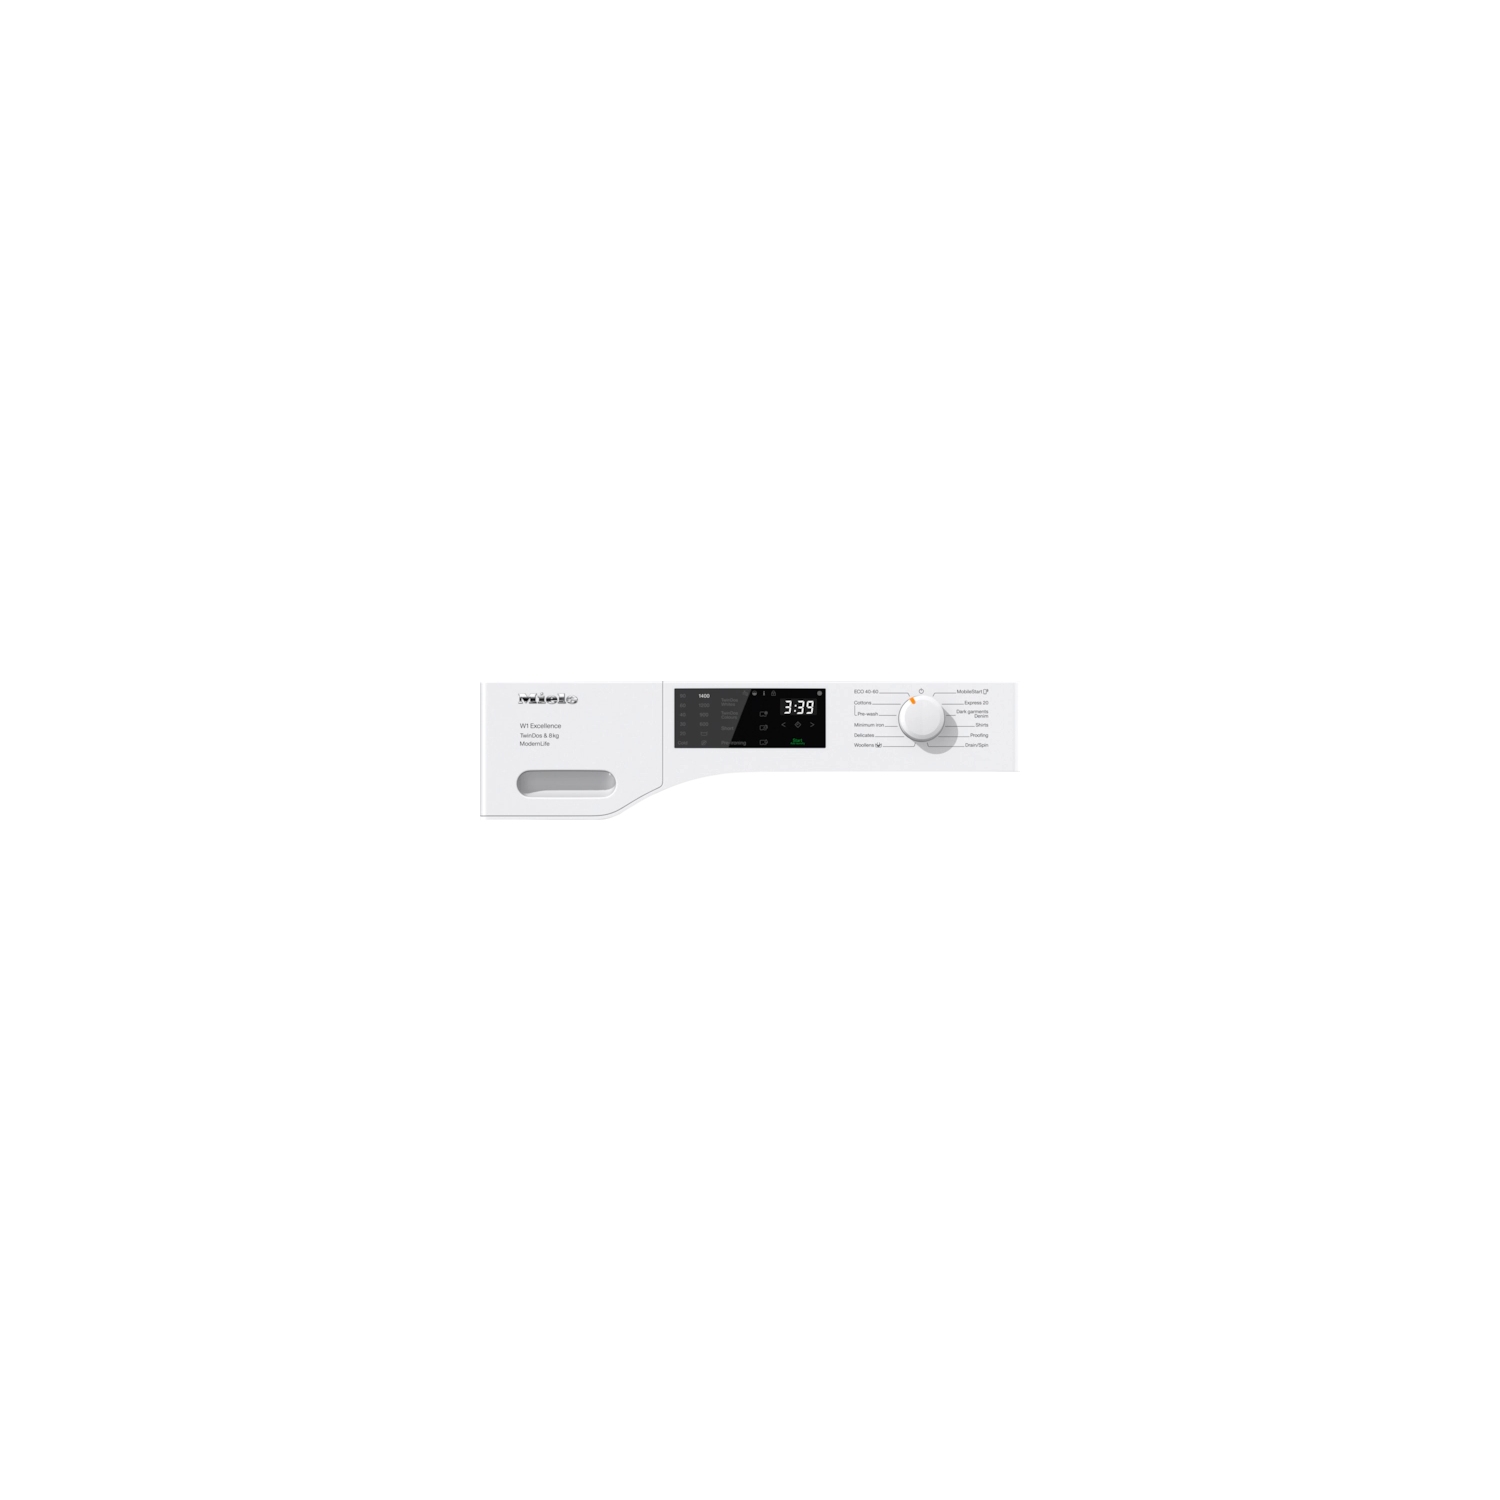 Miele WED665 TwinDos 8kg, 1400 Spin, A Energy - 2